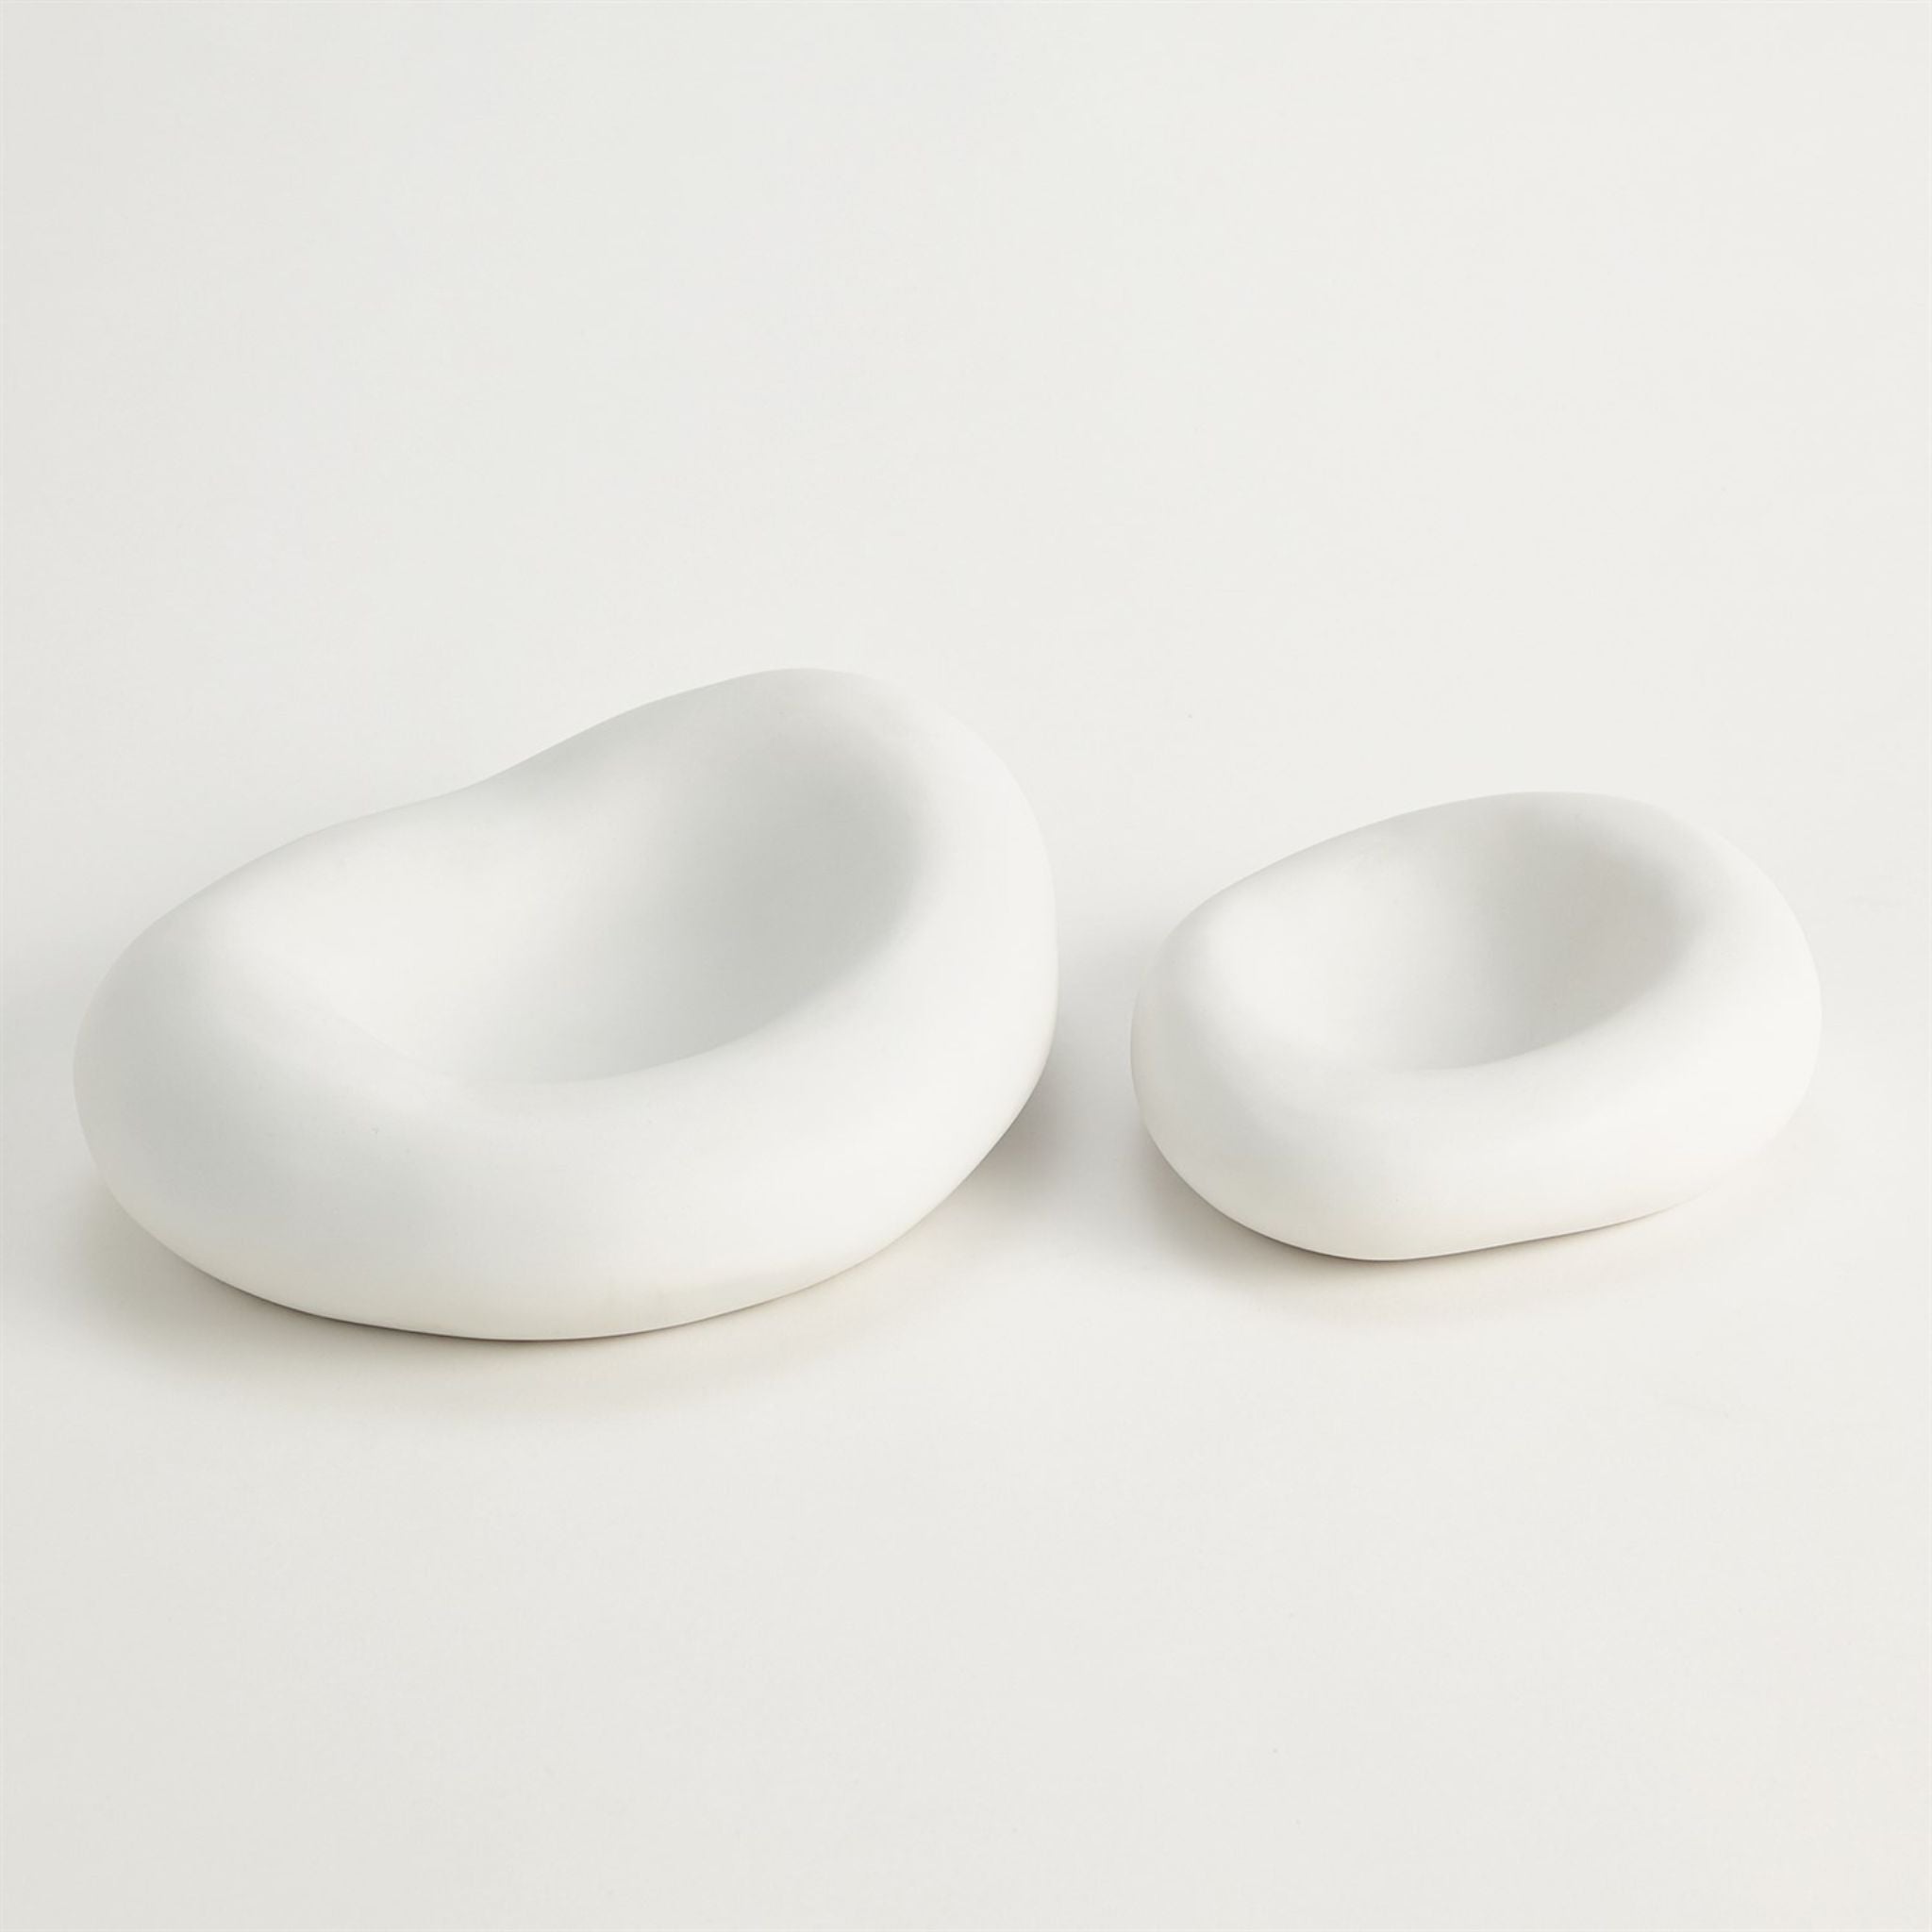 SIMPLY ELEVATED - Crafted in Italy, these organic shaped ceramic bowls have a matte white finish and available in two sizes.